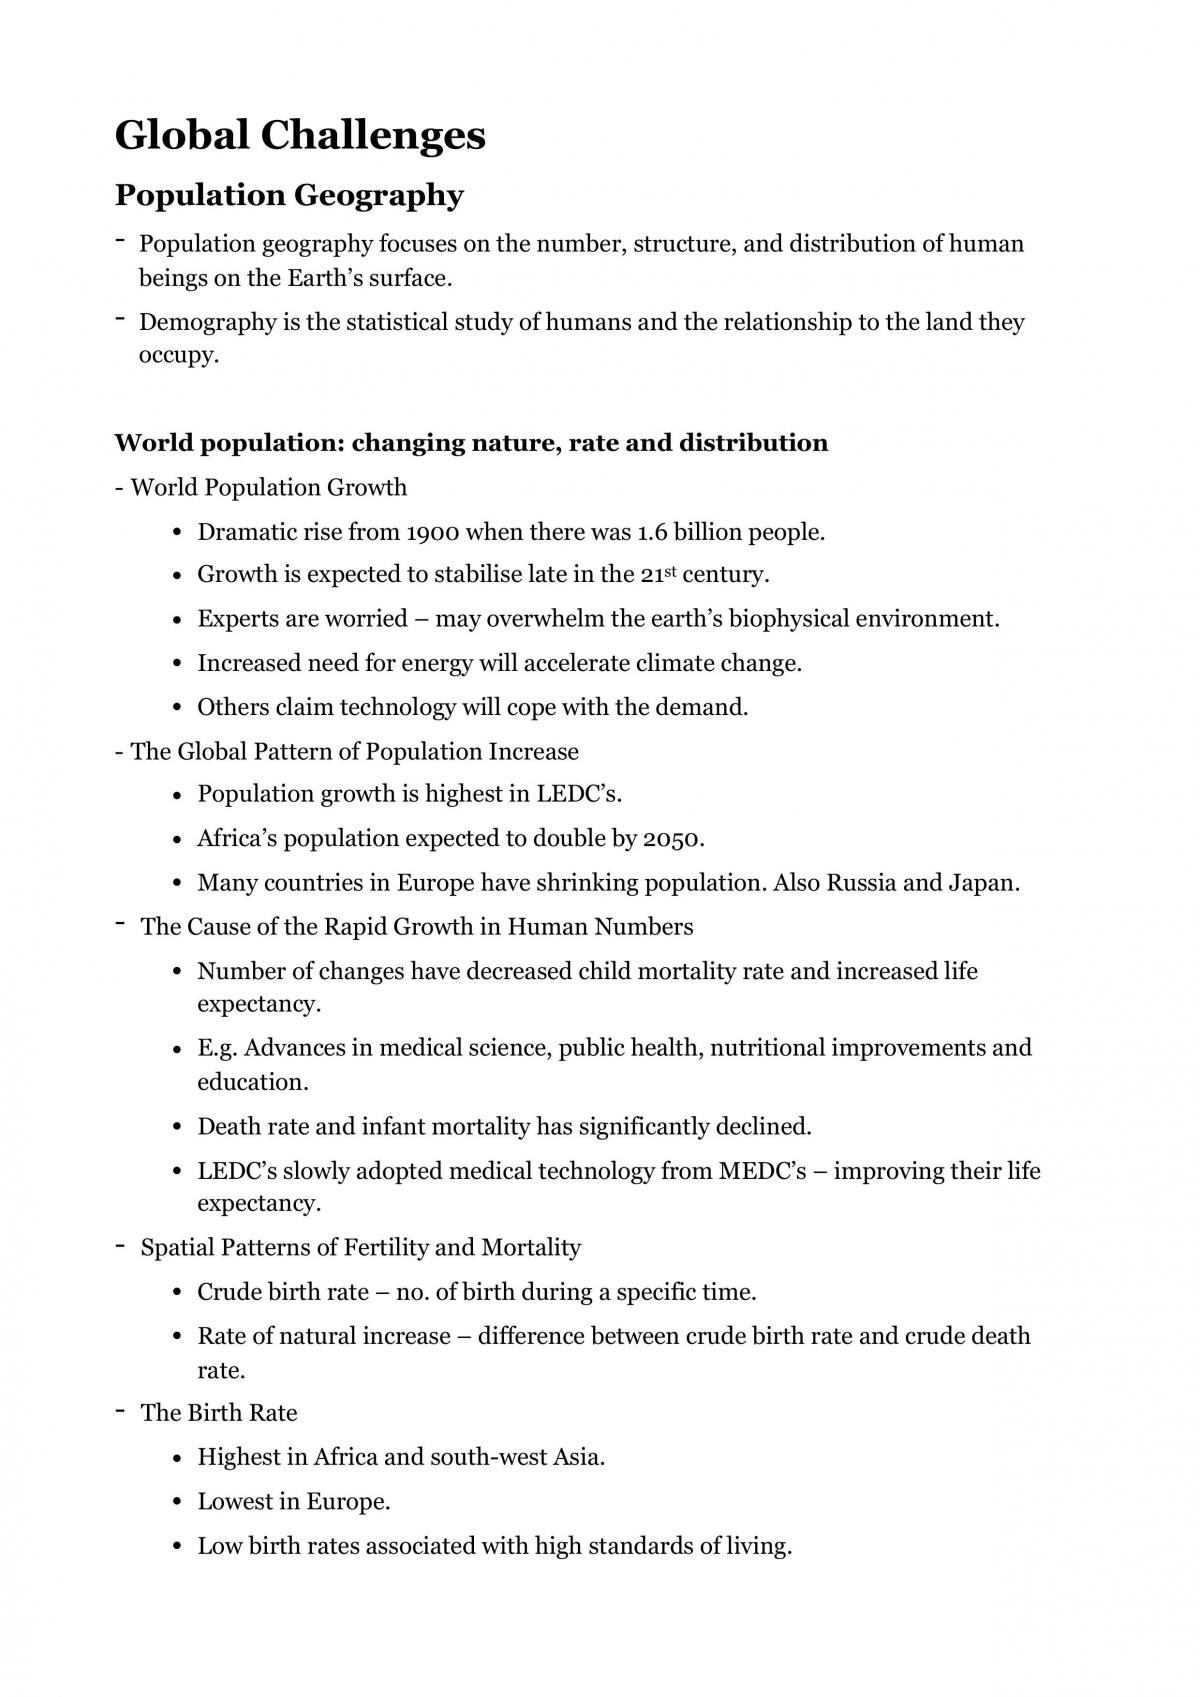 Prelim Geography: Global Challenges - Population Geography Full Notes - Page 1